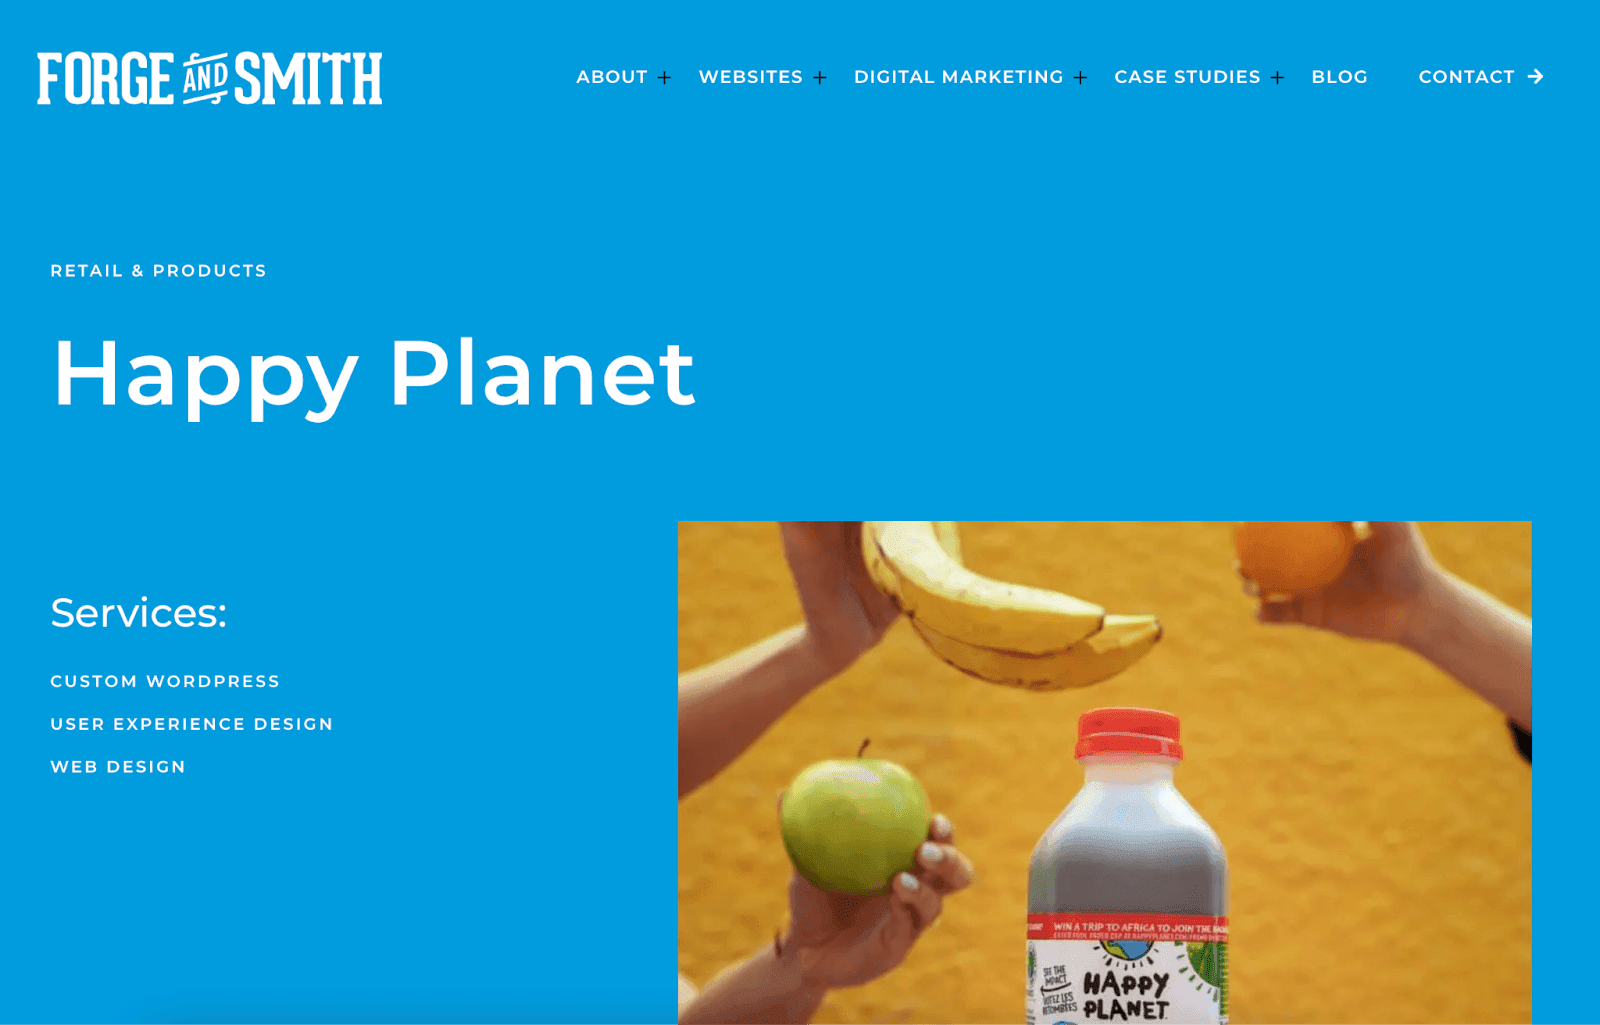 Forge and Smith's Happy Planet website